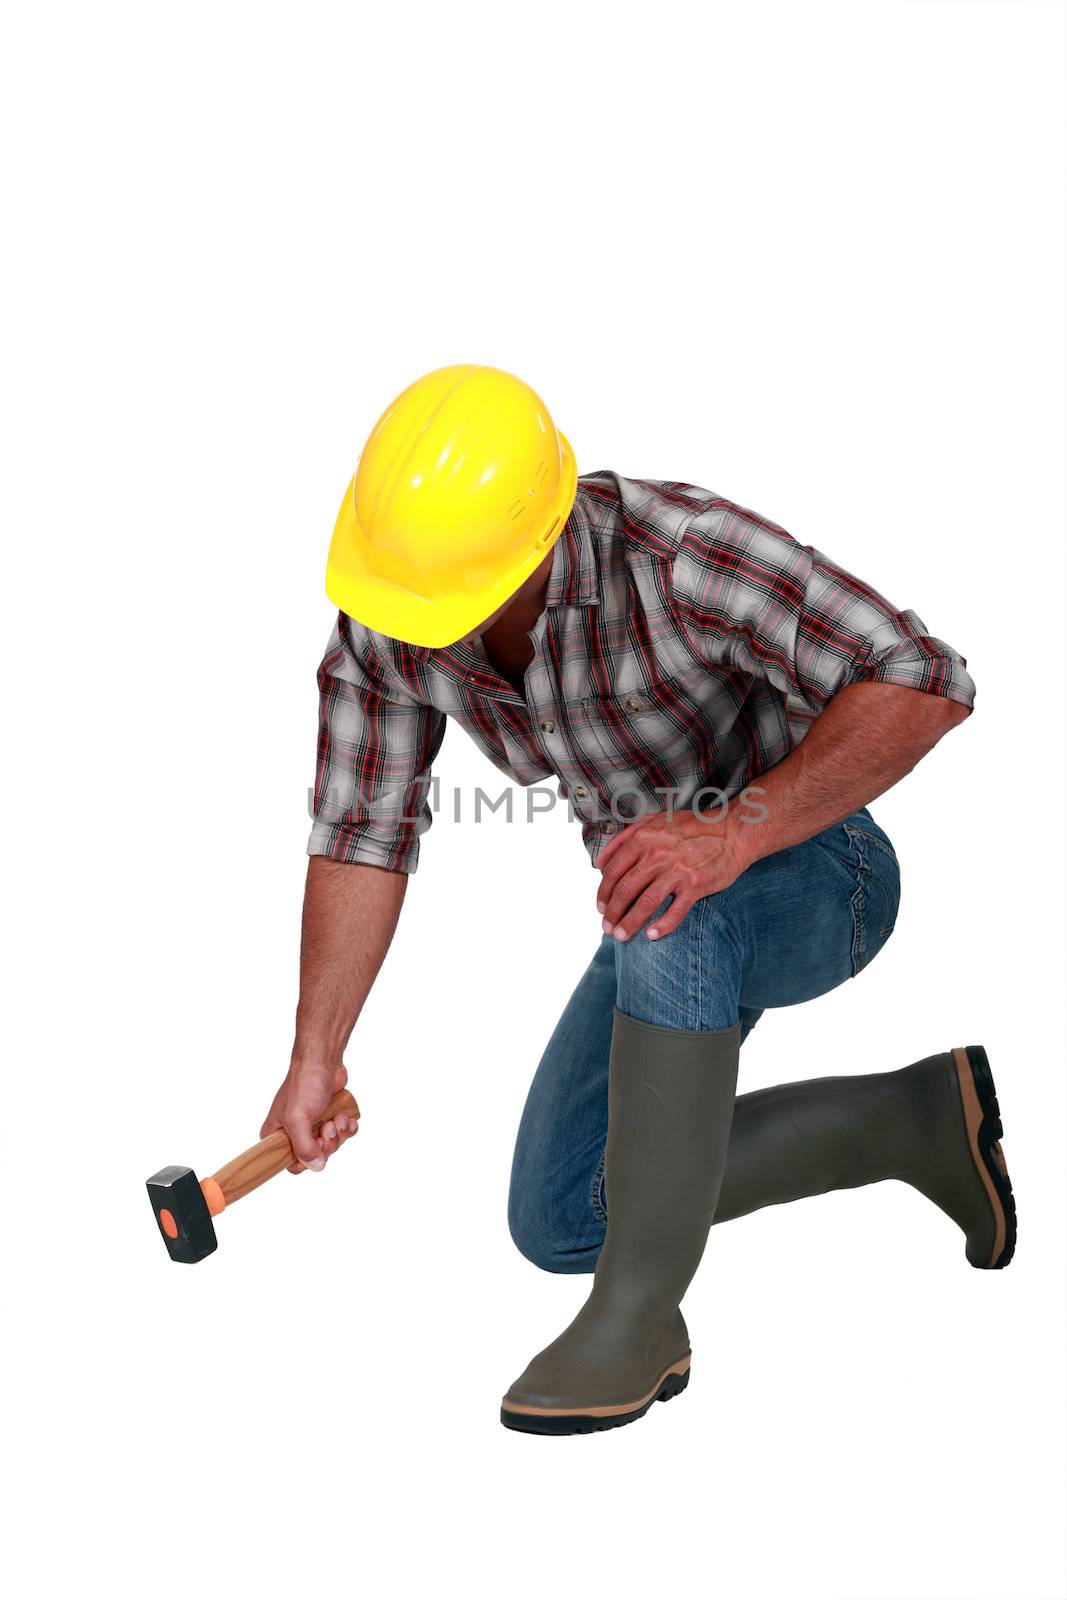 A manual worker with a hammer.